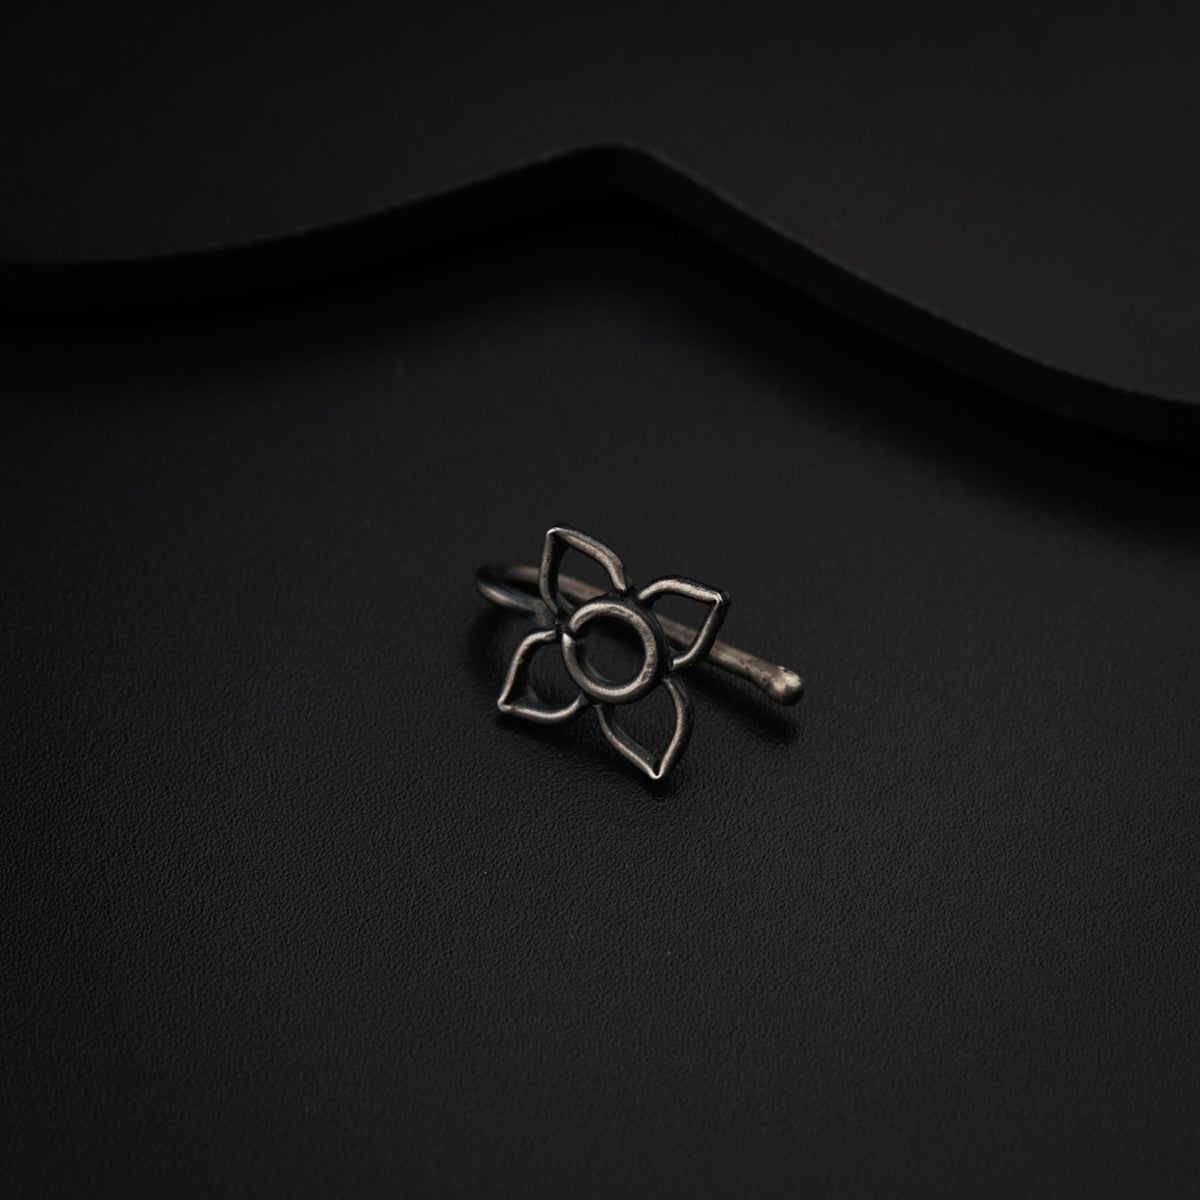 a metal object sitting on top of a black surface